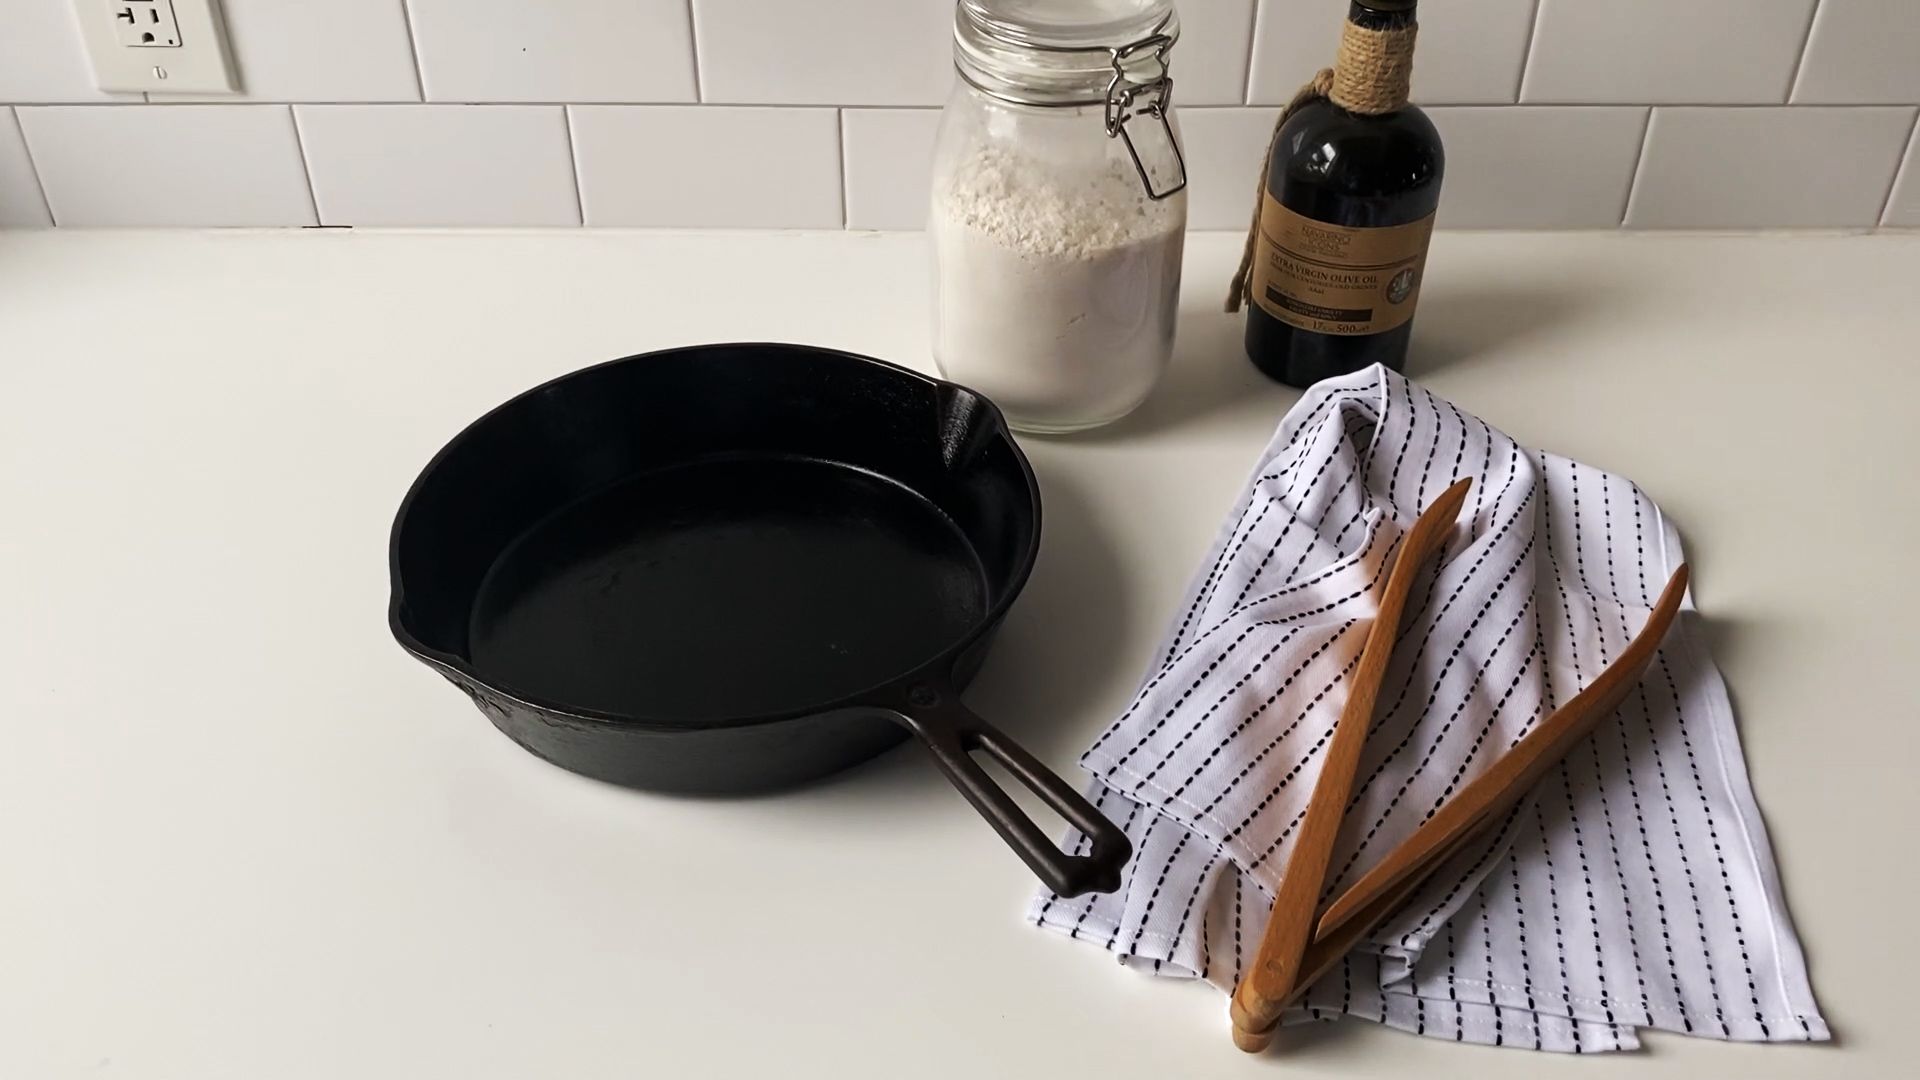 How to season and clean a cast iron skillet properly - TODAY